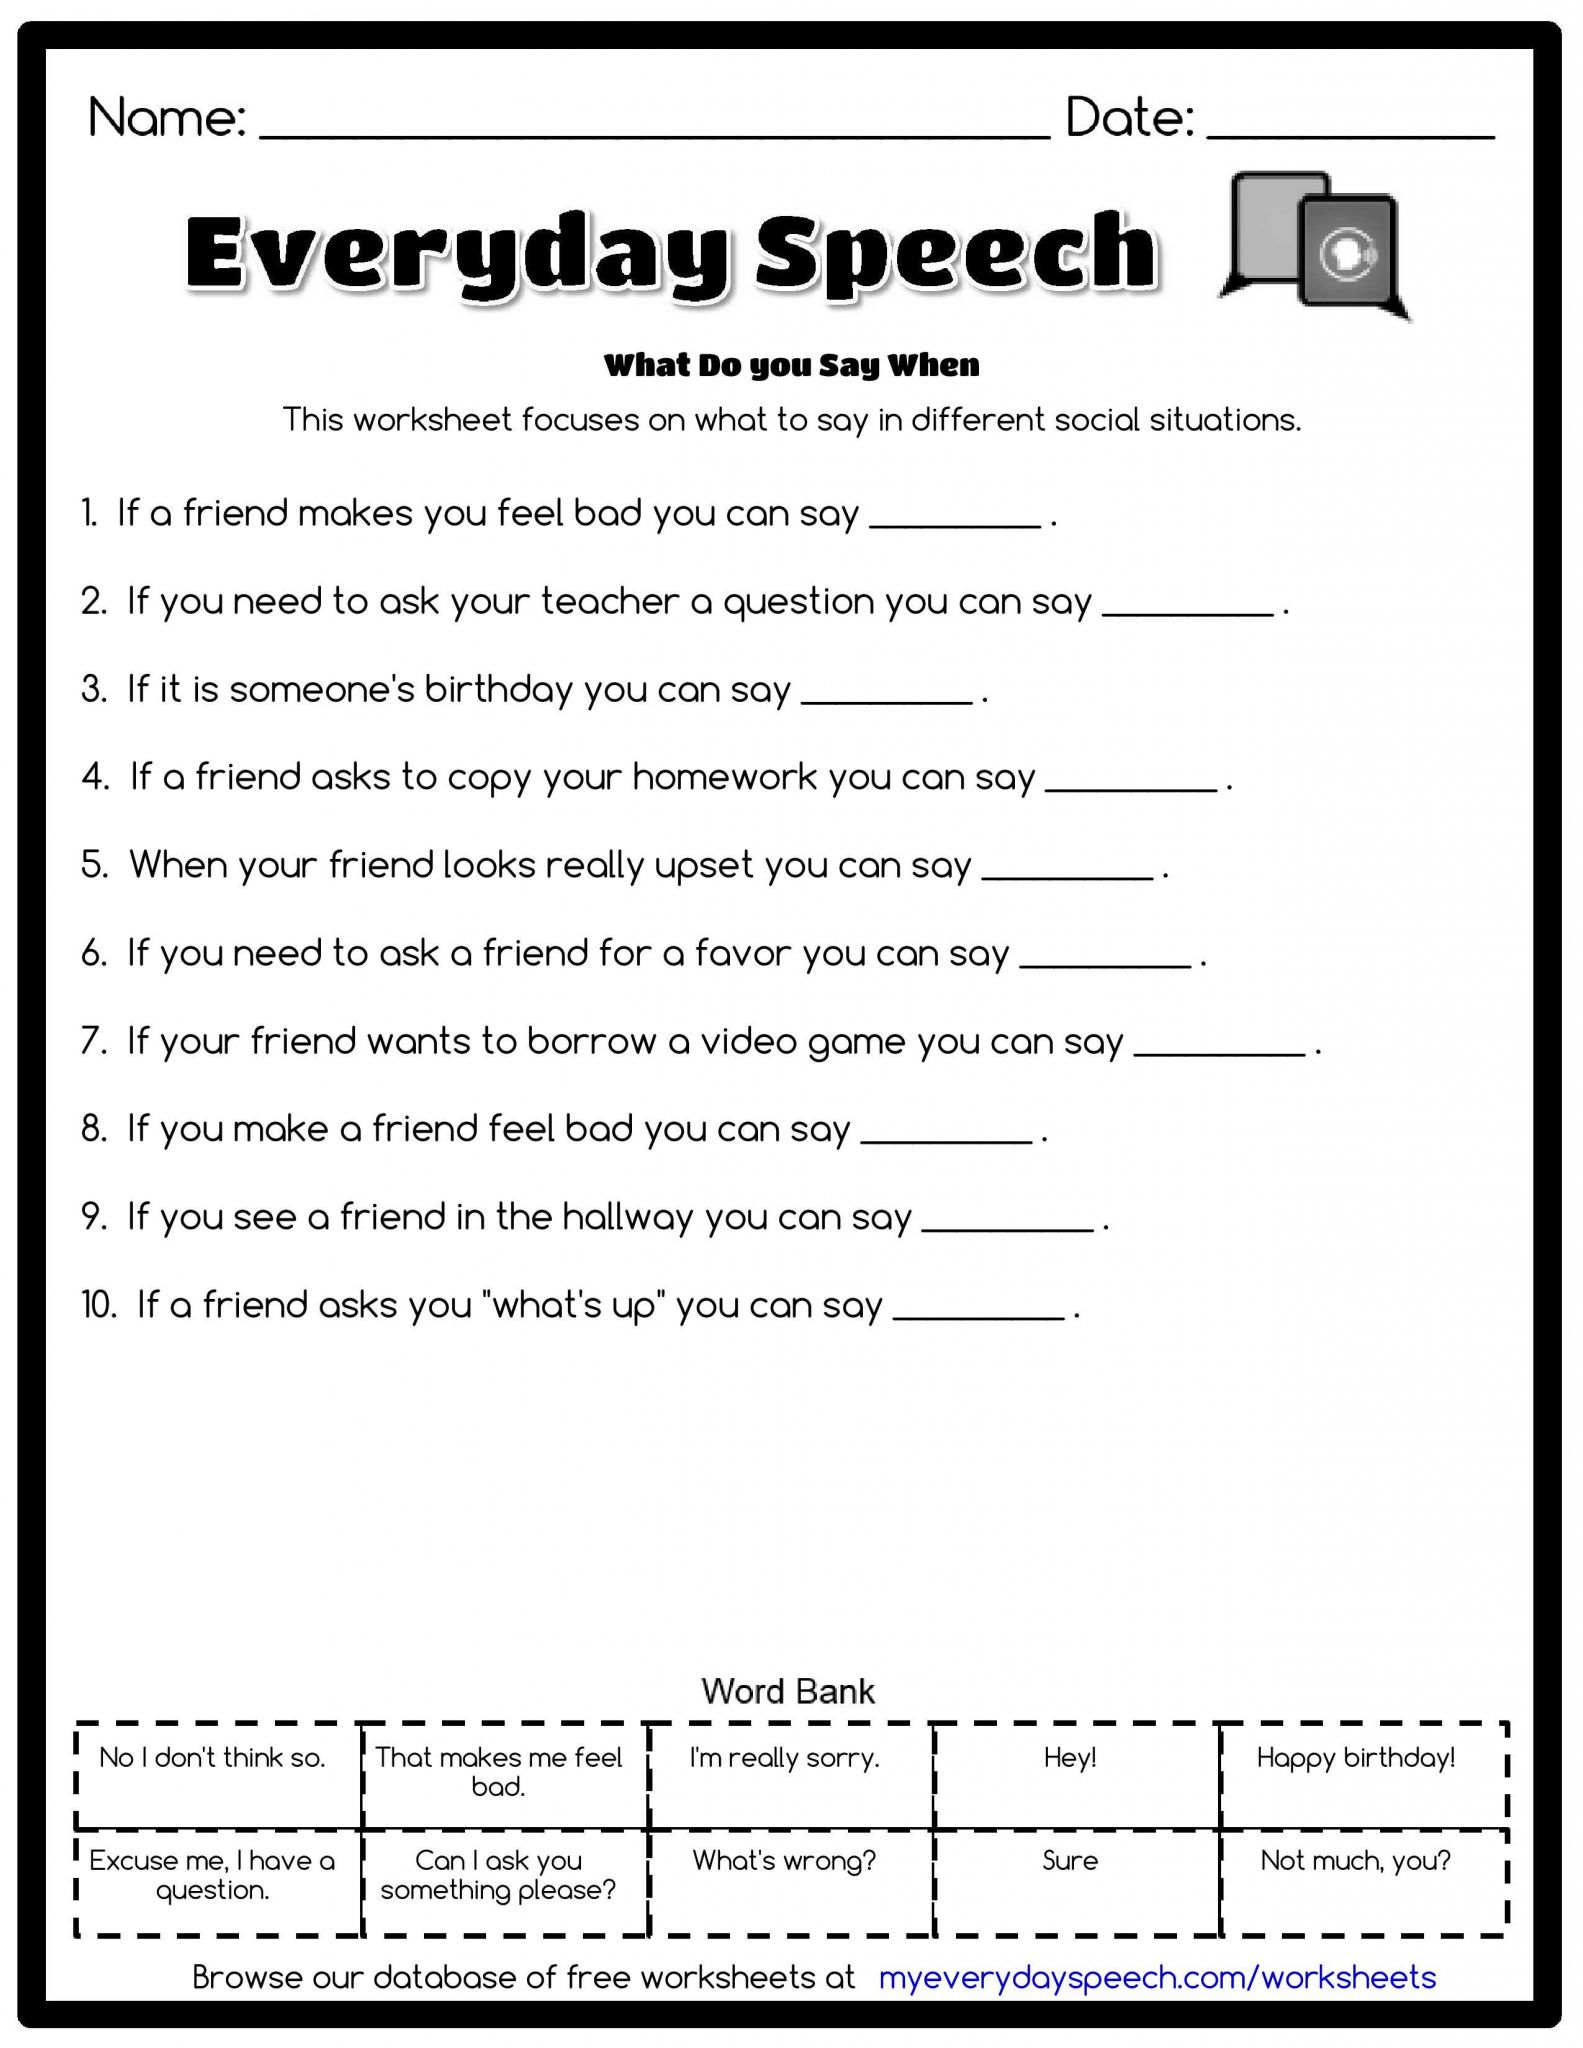 Free Sentence Scramble Worksheets and 200 Most Downloaded Worksheets